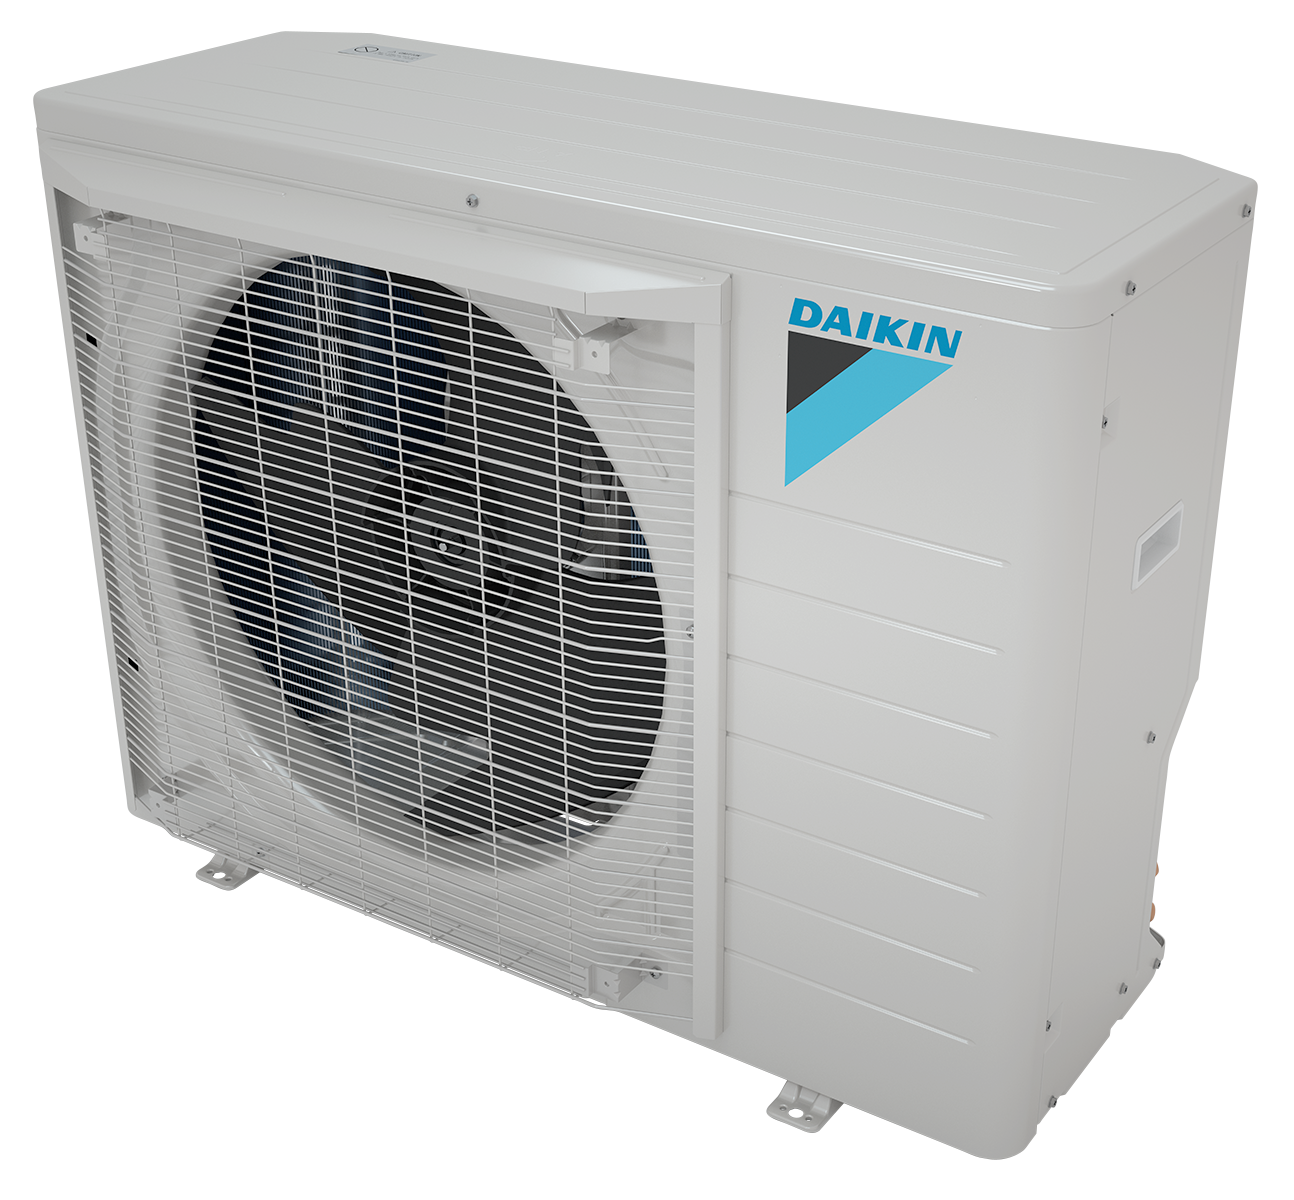 Prevett Heating and Cooling |A daikin air conditioner is shown on a white background